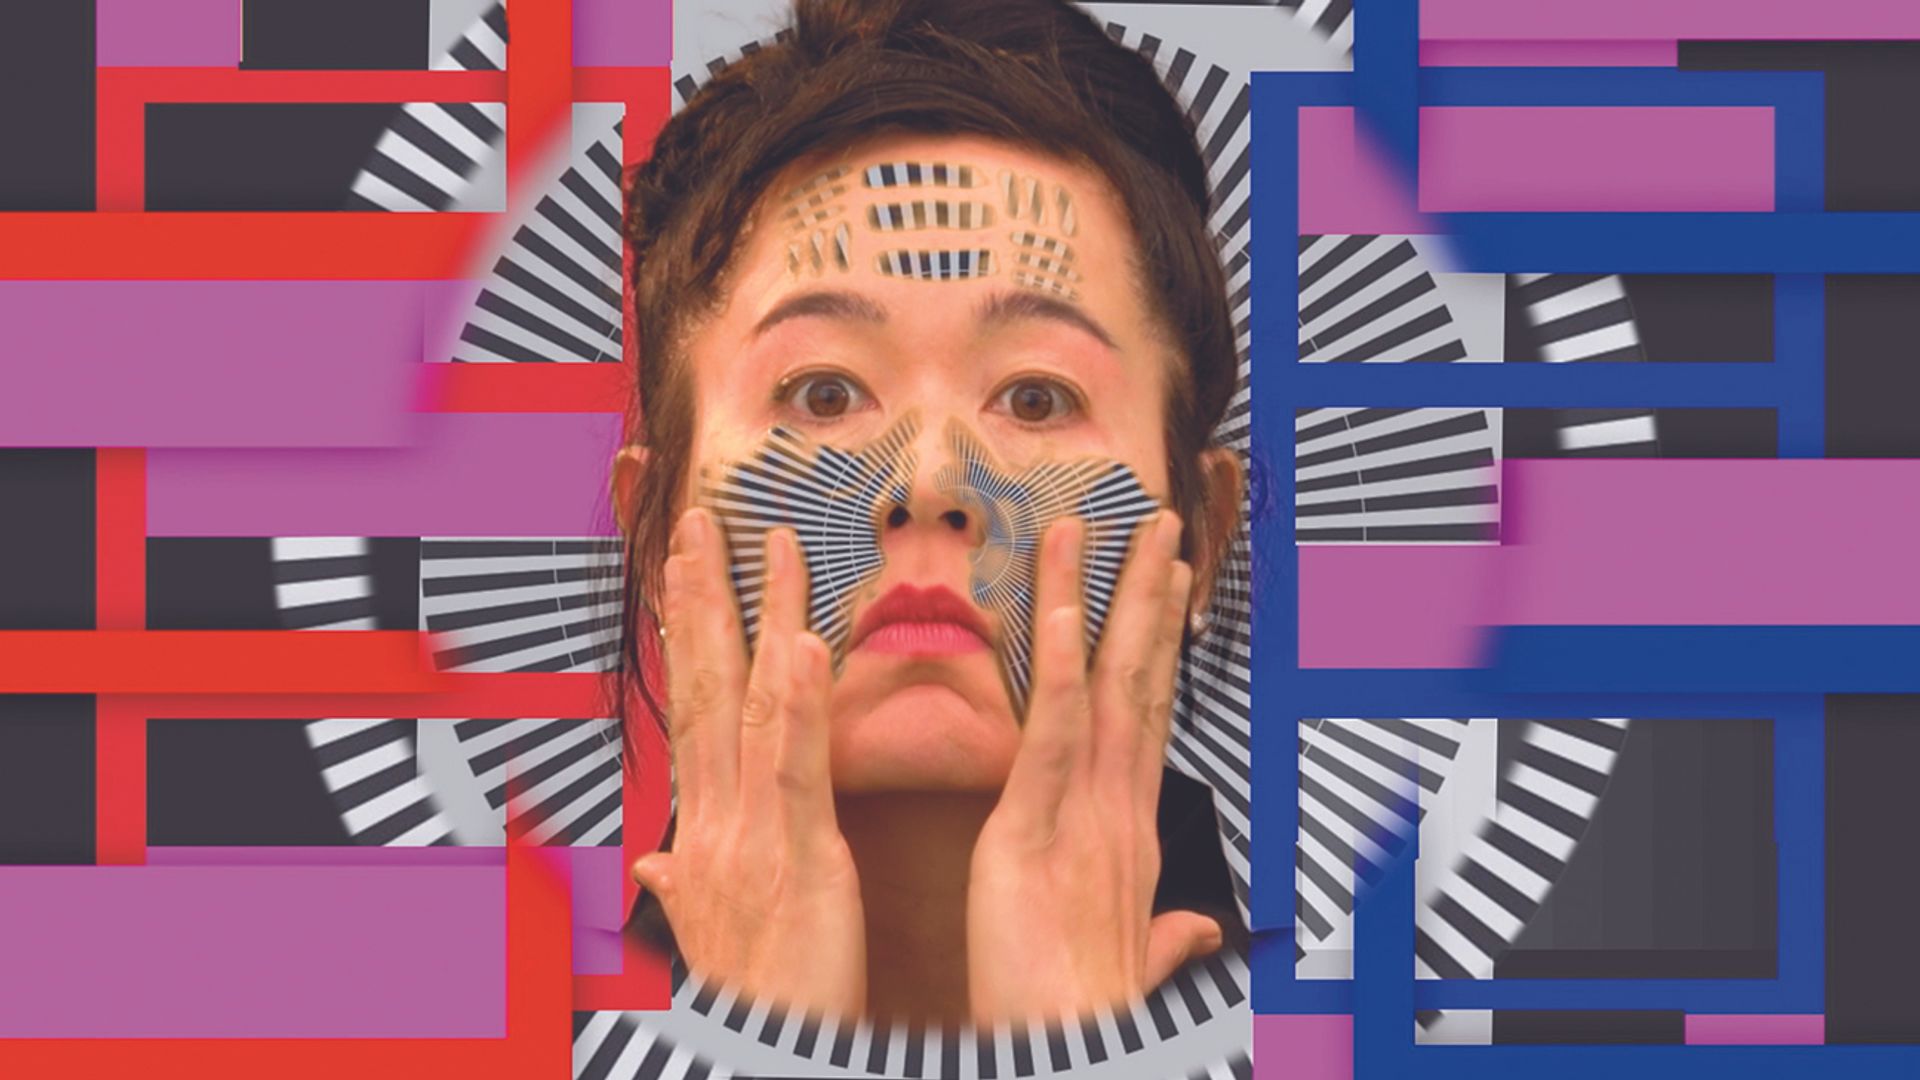 Hito Steyerl’s How Not to Be Seen: A Fucking Didactic Educational